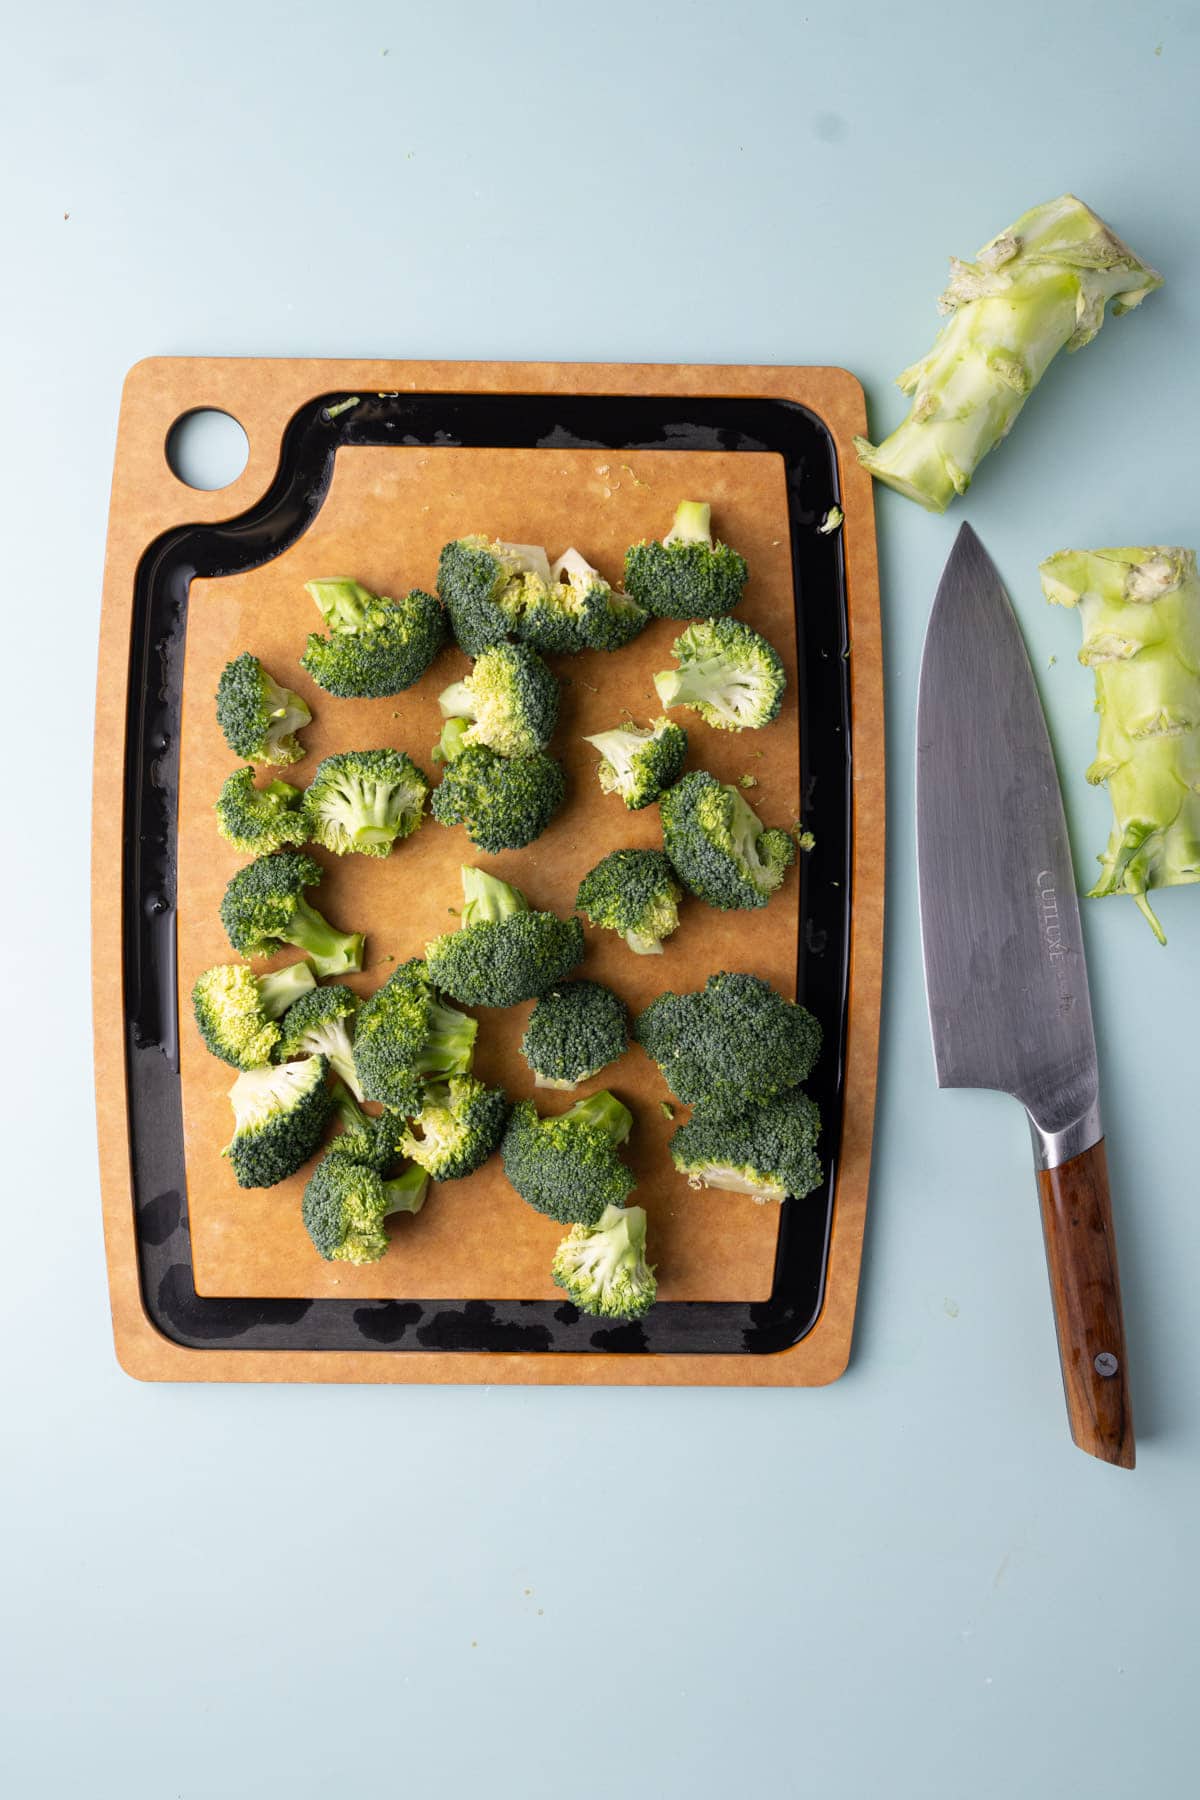 Broccoli cut off the stem into bite-sized pieces. 